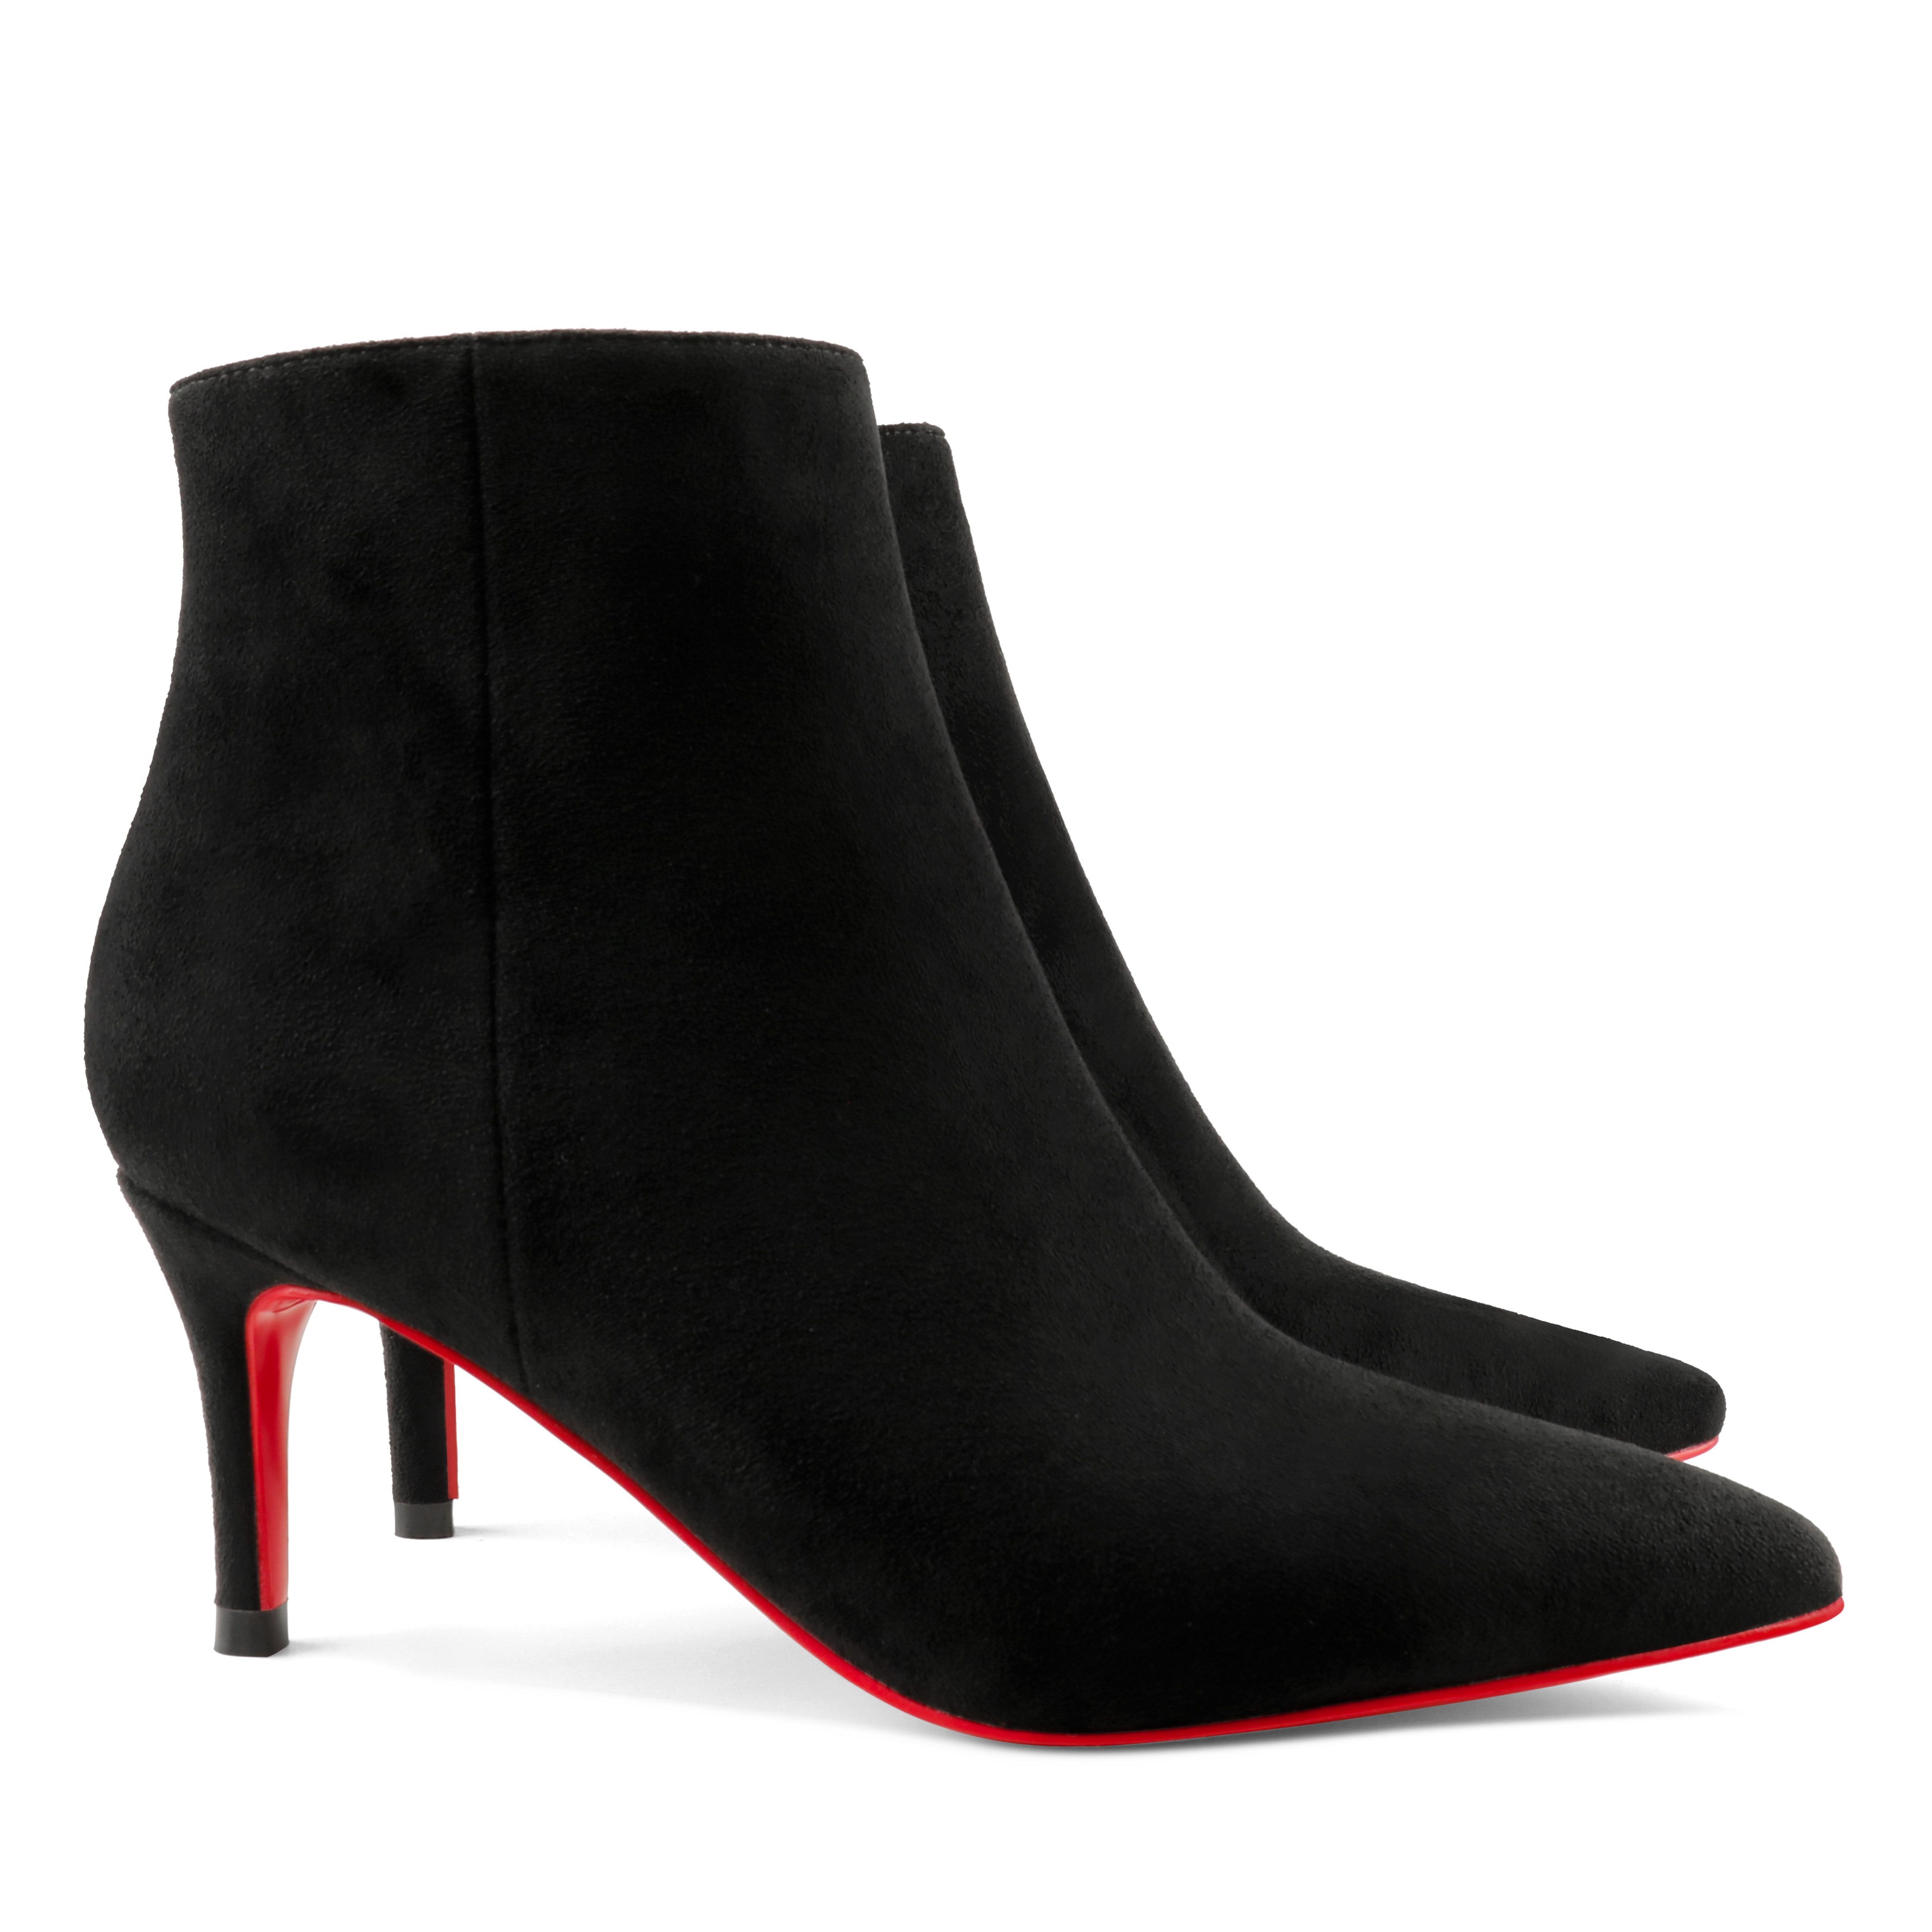 90mm Women's Ankle Boots Closed Pointed Toe Red Bottom Stilettos Booties